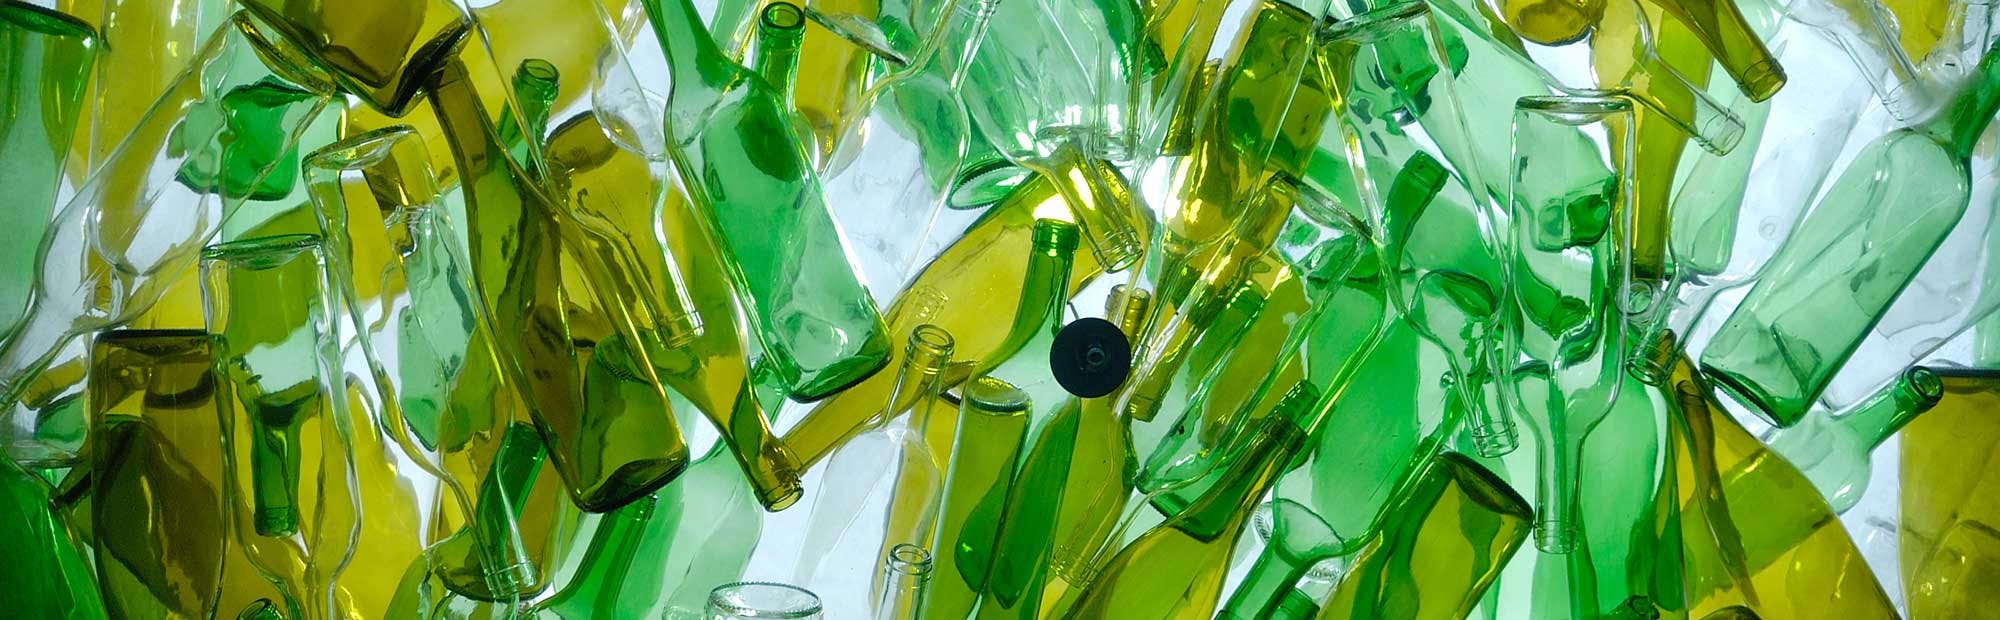 How is glass recycled?